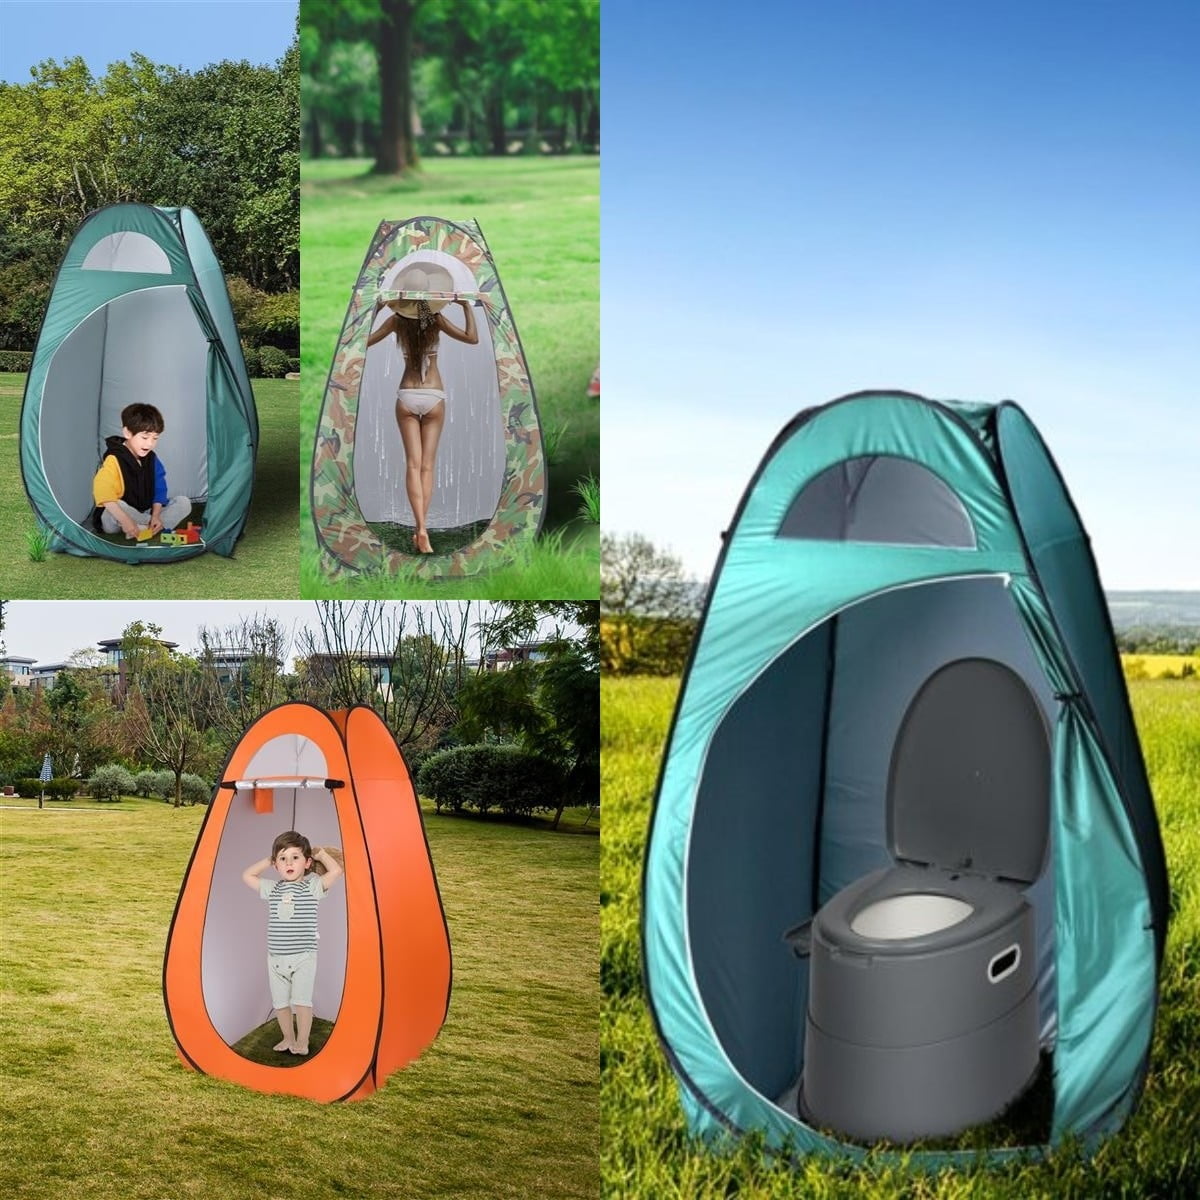 Outdoor Portable Tents Instant Pop Up Tent Camping Shower Toilet Changing Room 